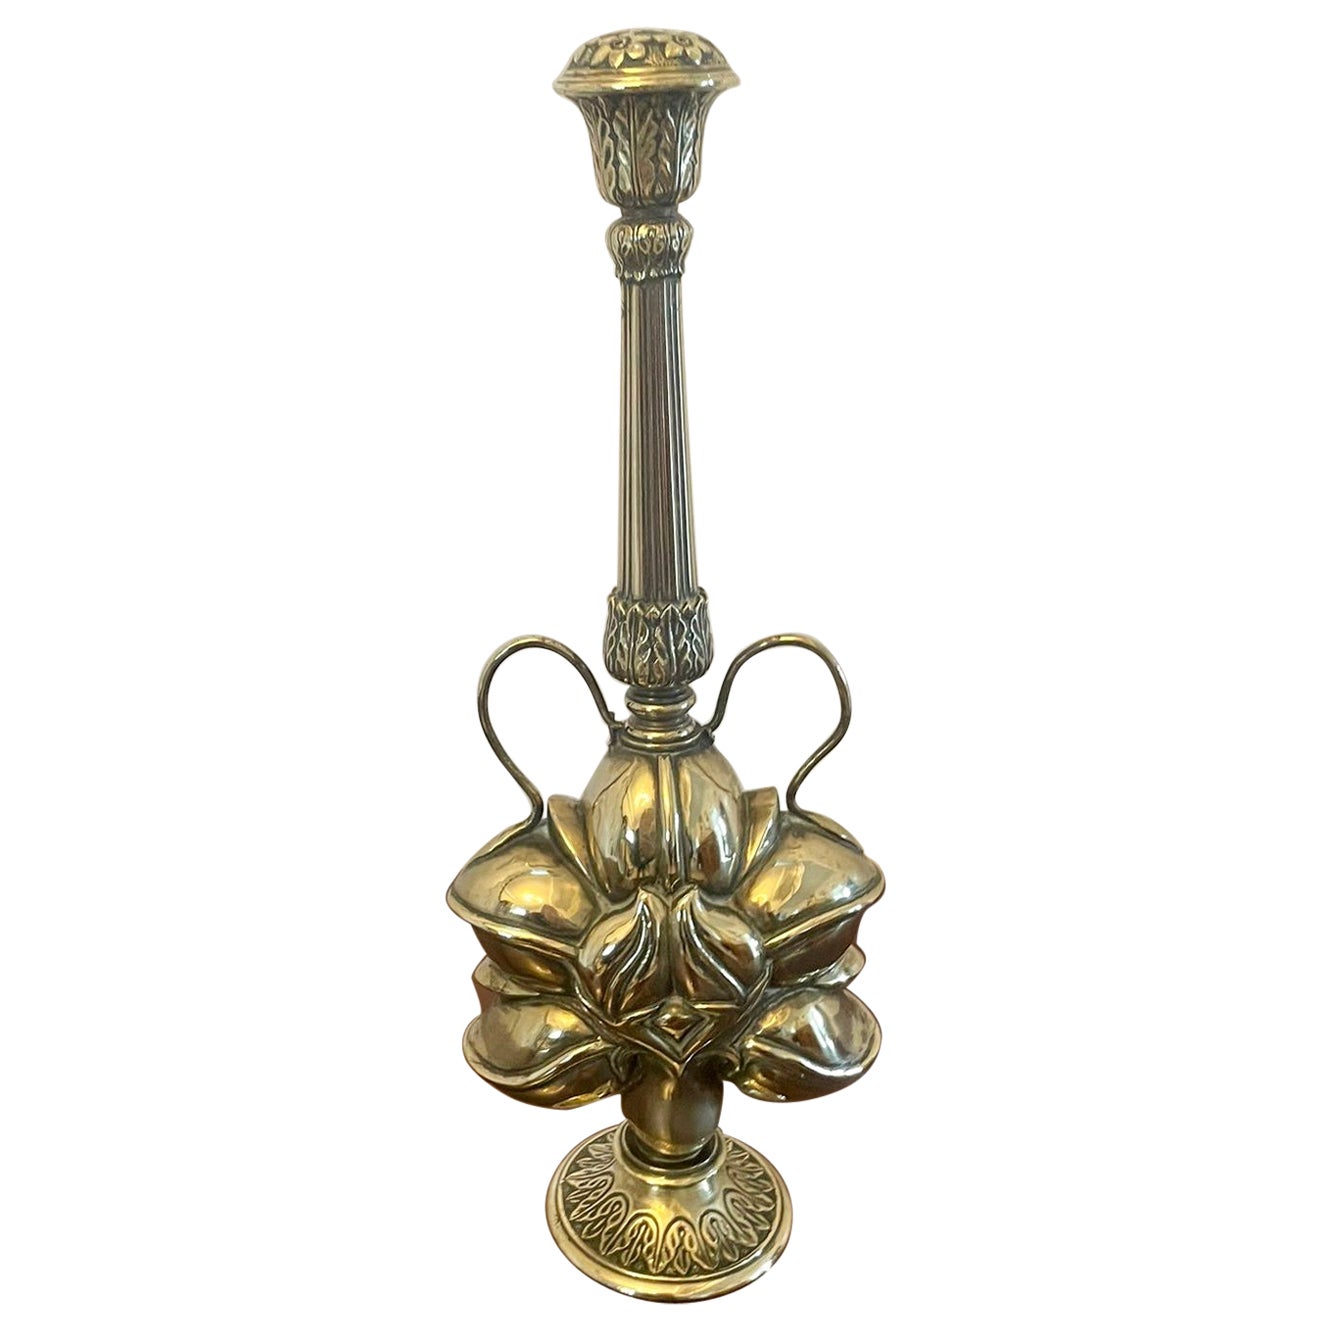 Unusual Antique Victorian Quality Brass Shaker  For Sale